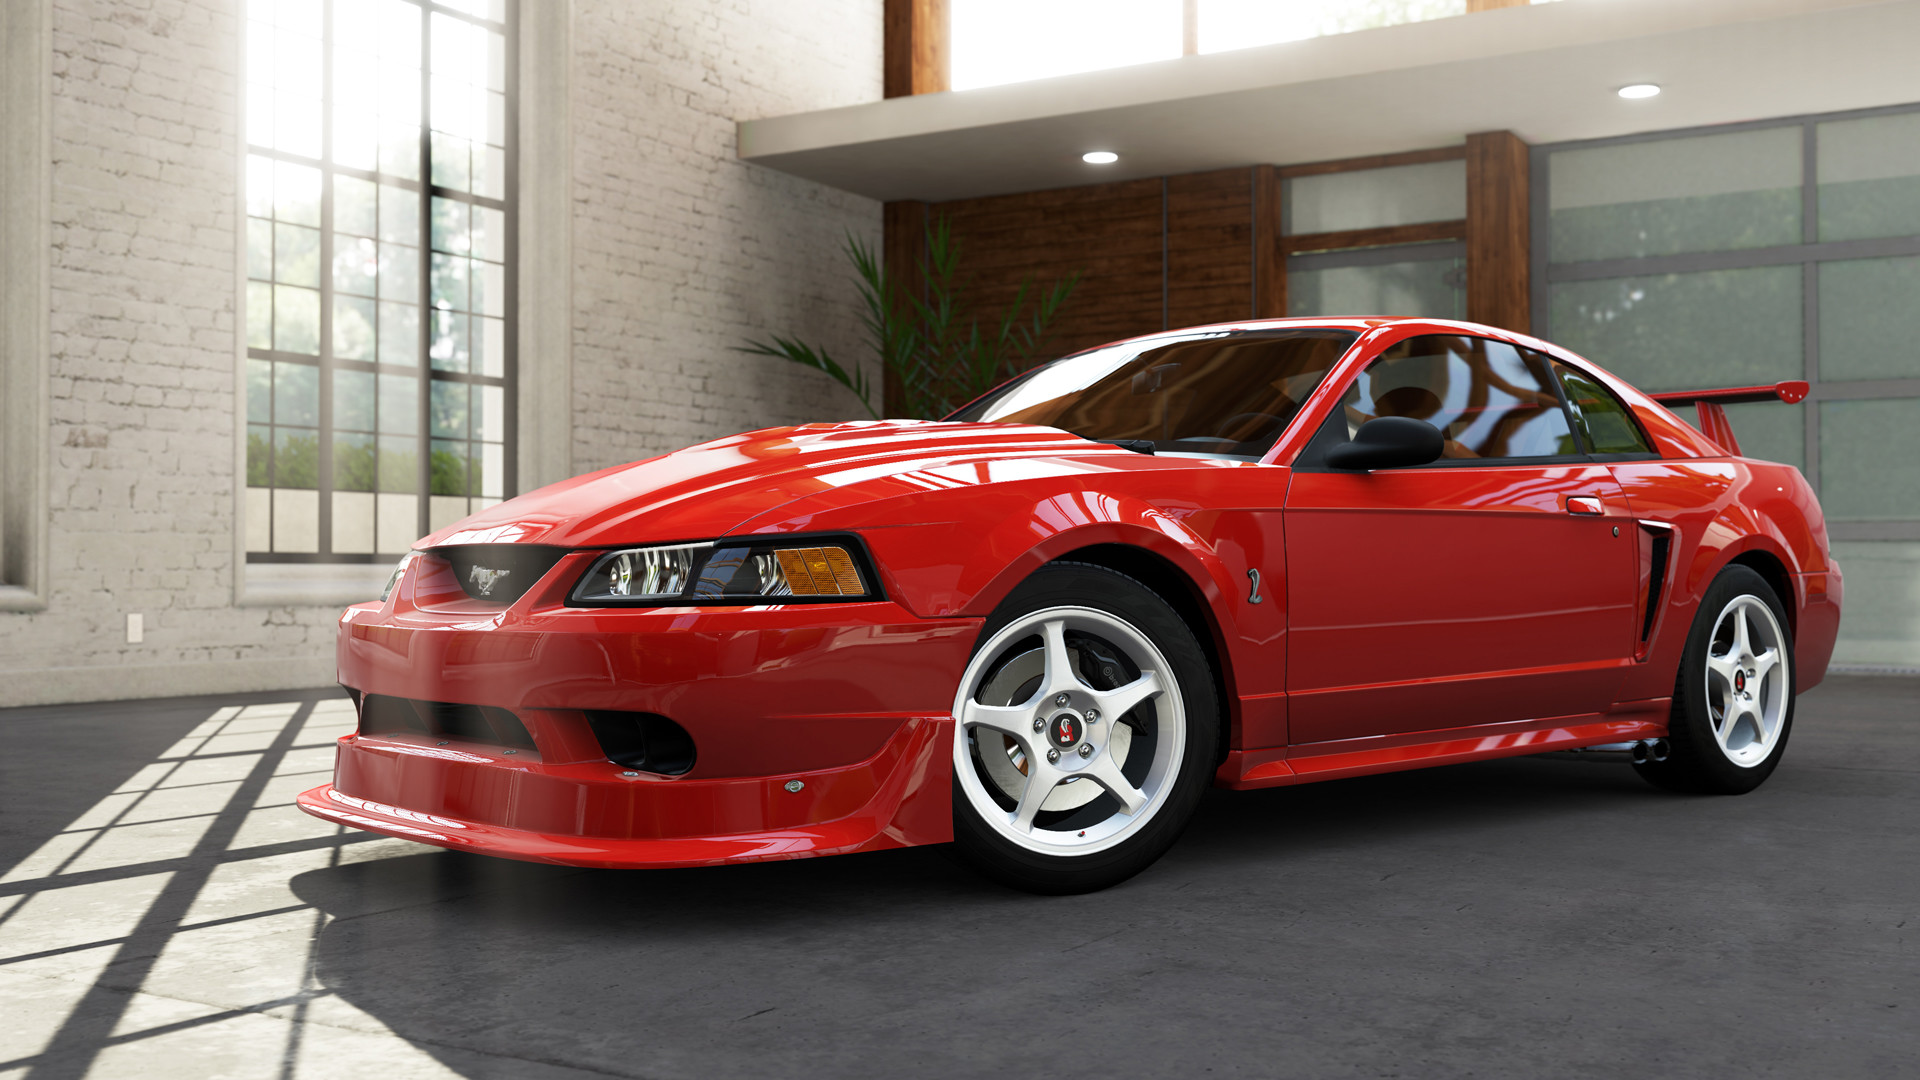 32+ 2003 Ford Mustang Cobra Terminator Wallpapers on ...